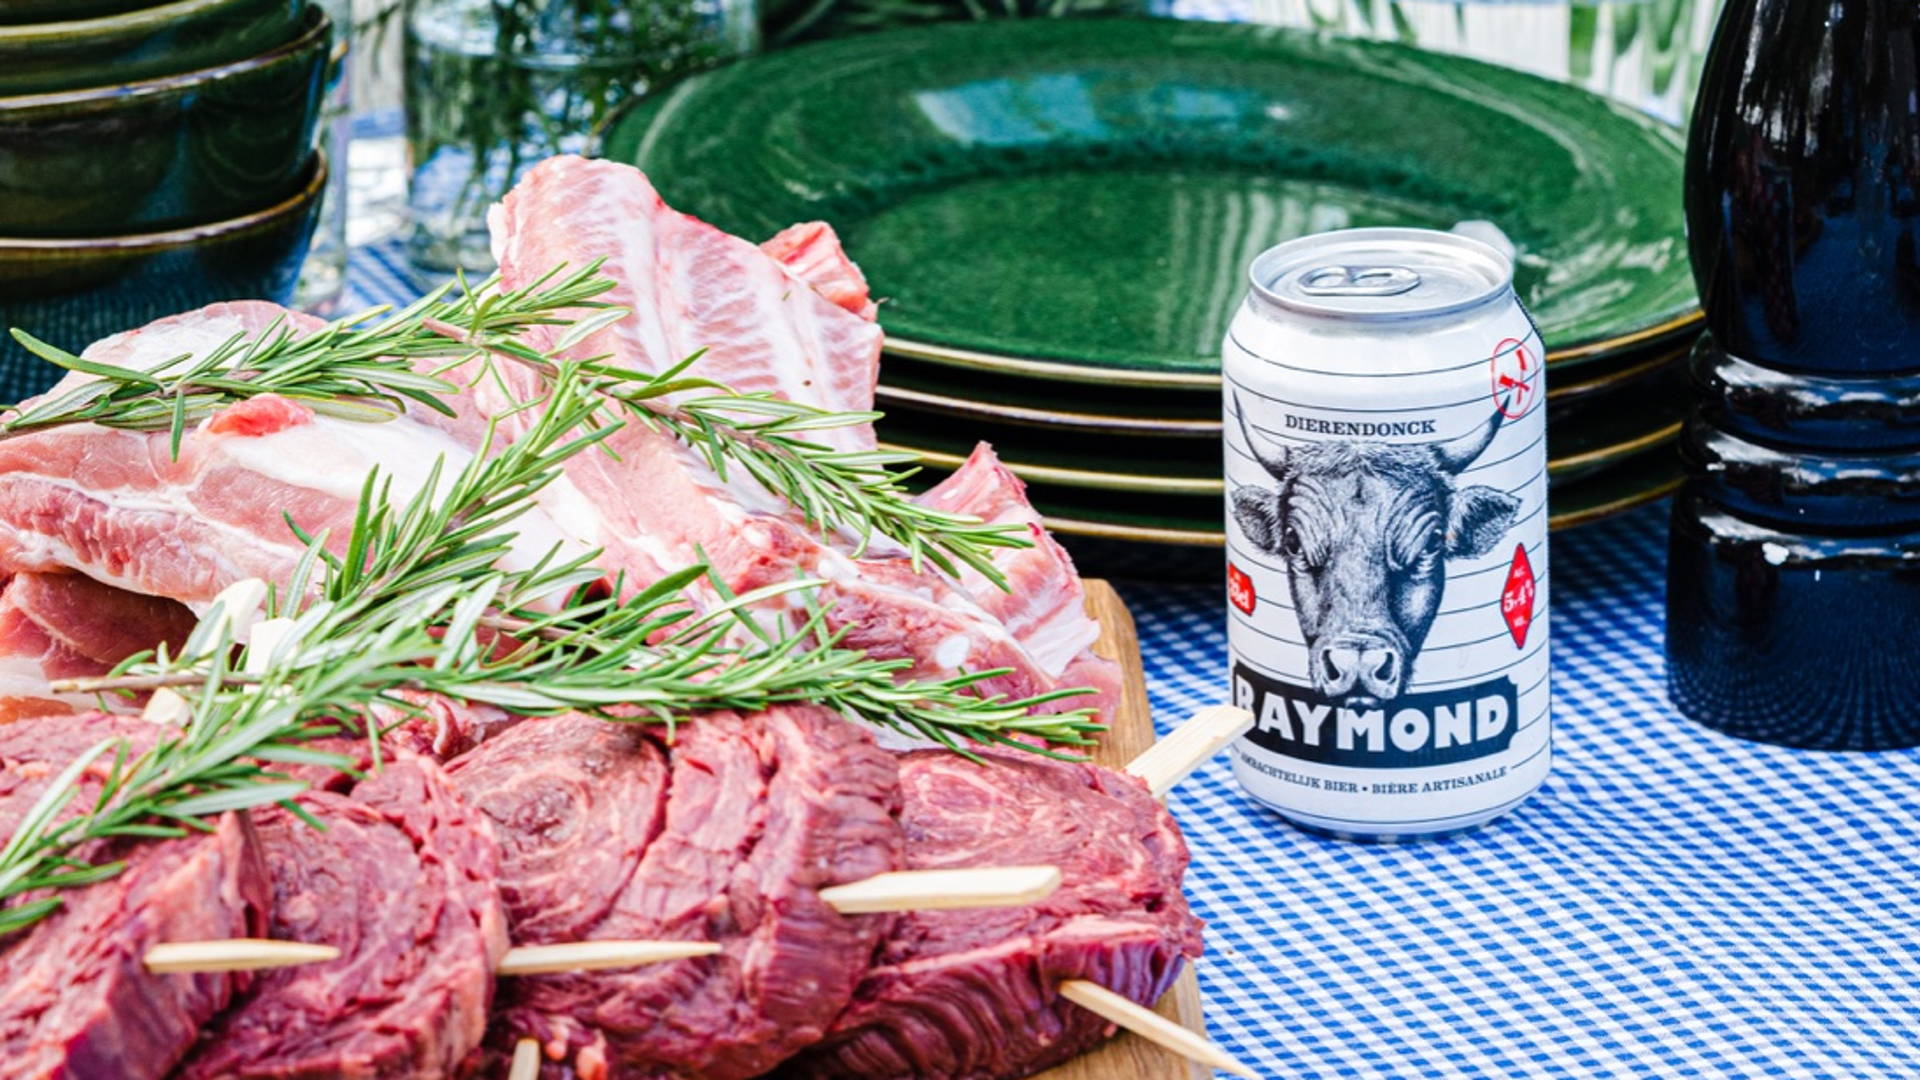 Featured image for There's No BBQ Without Raymond's Beer